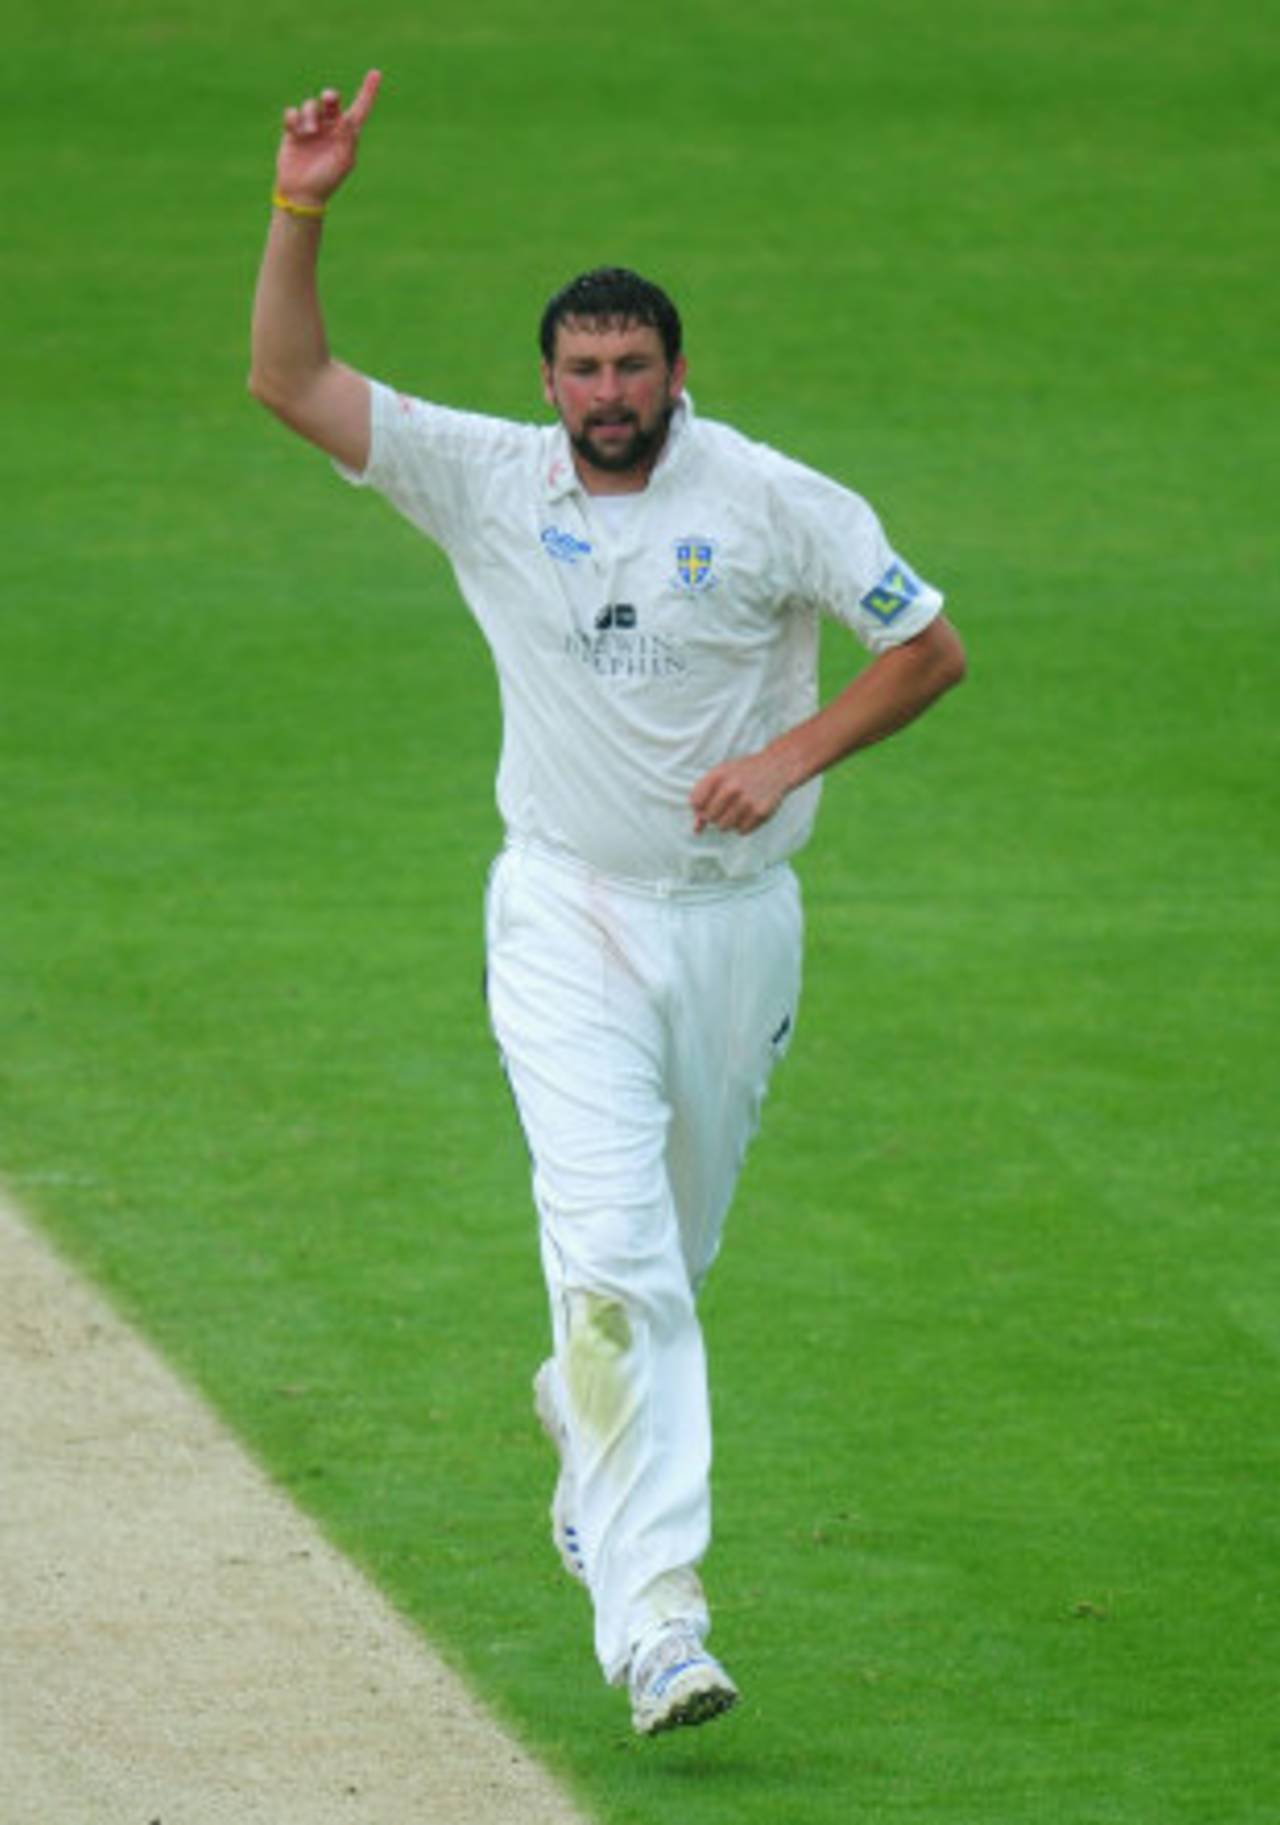 Steve Harmison celebrates a wicket, Durham v Lancashire, County Championship, Division One, Chester-le-Street, 2nd day, May 31, 2012